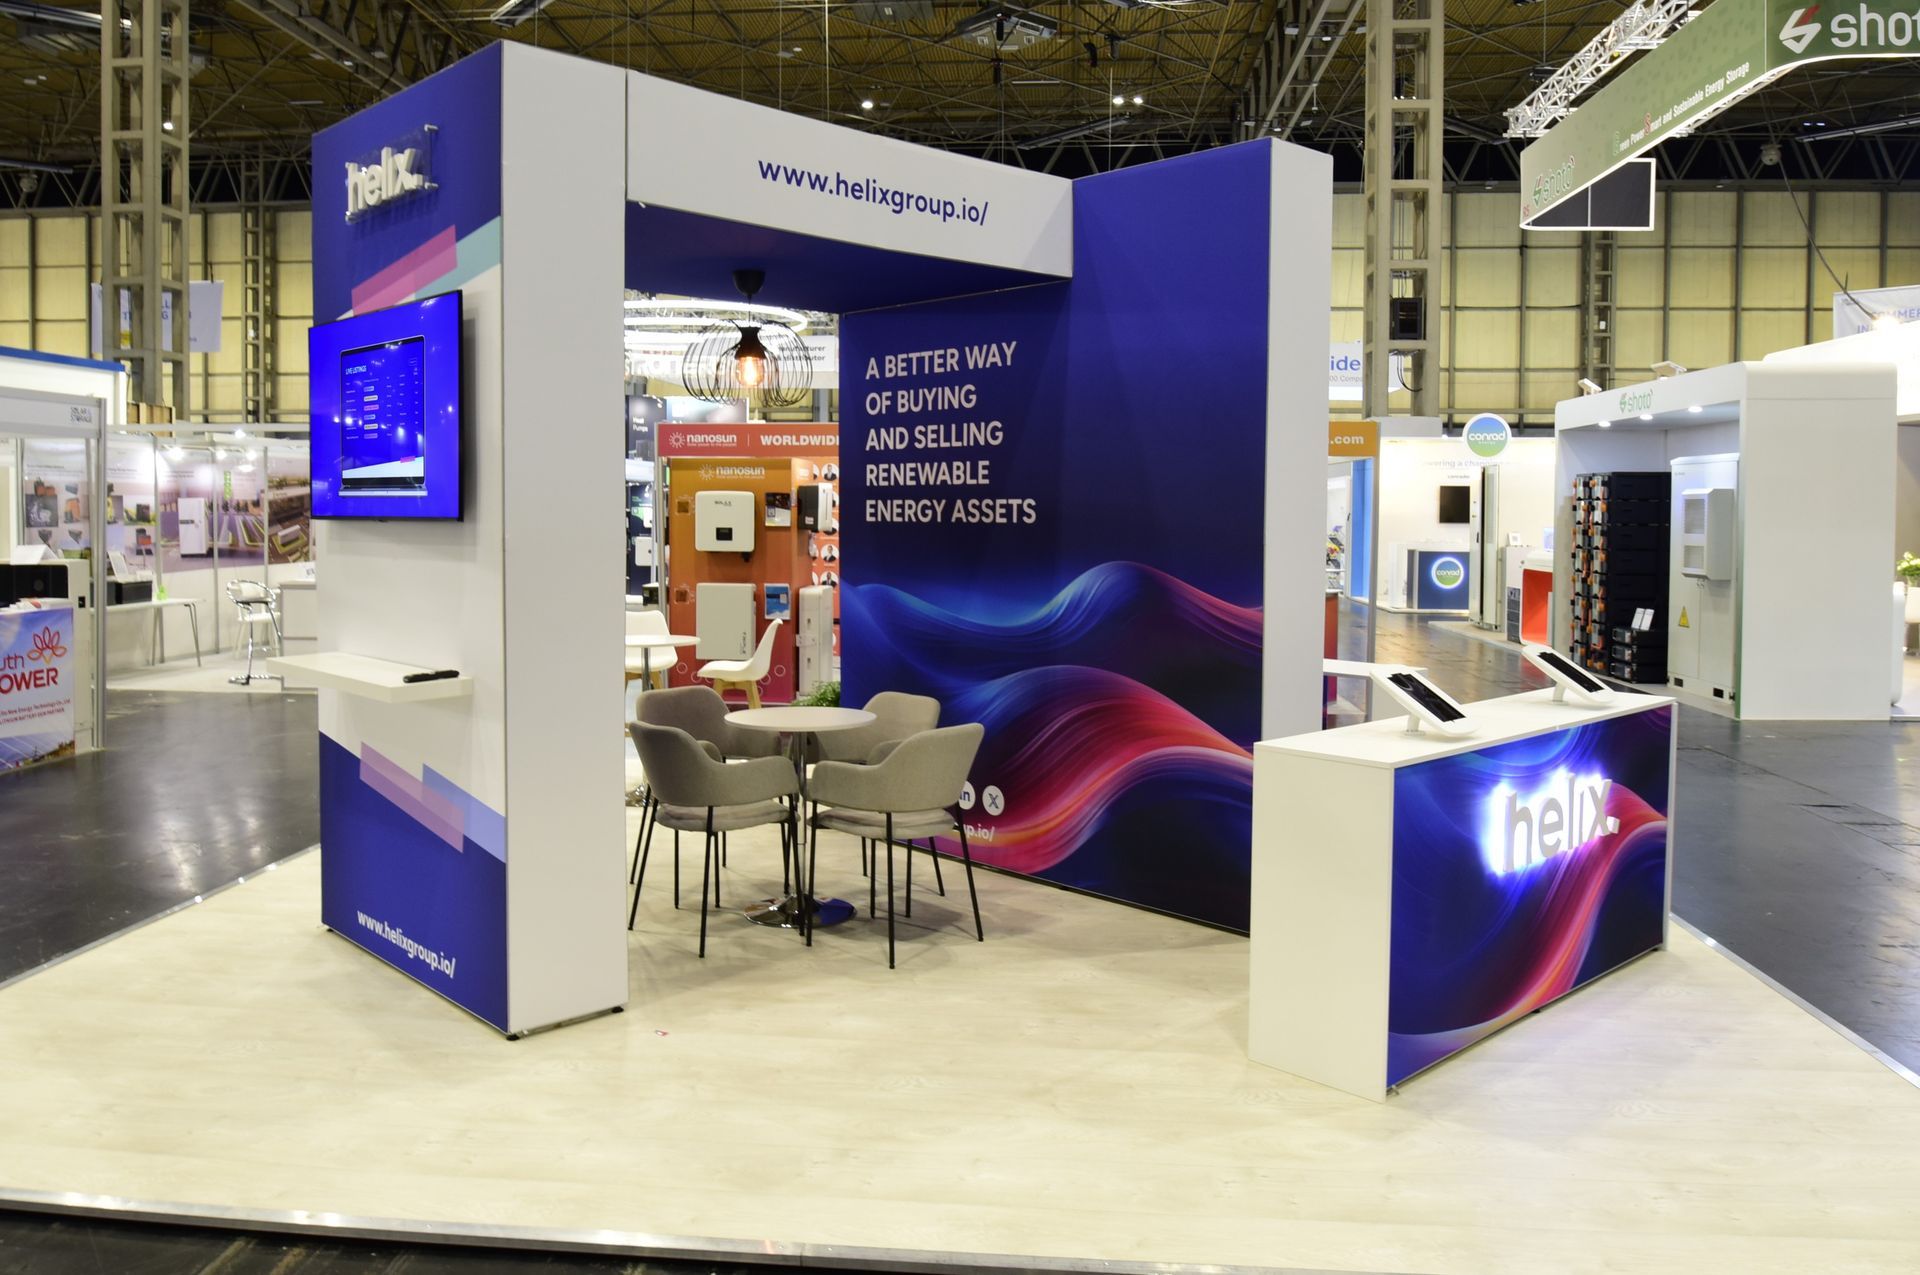 Exhibition Stands UK - Modular stands Designed and Made by Tecna UK